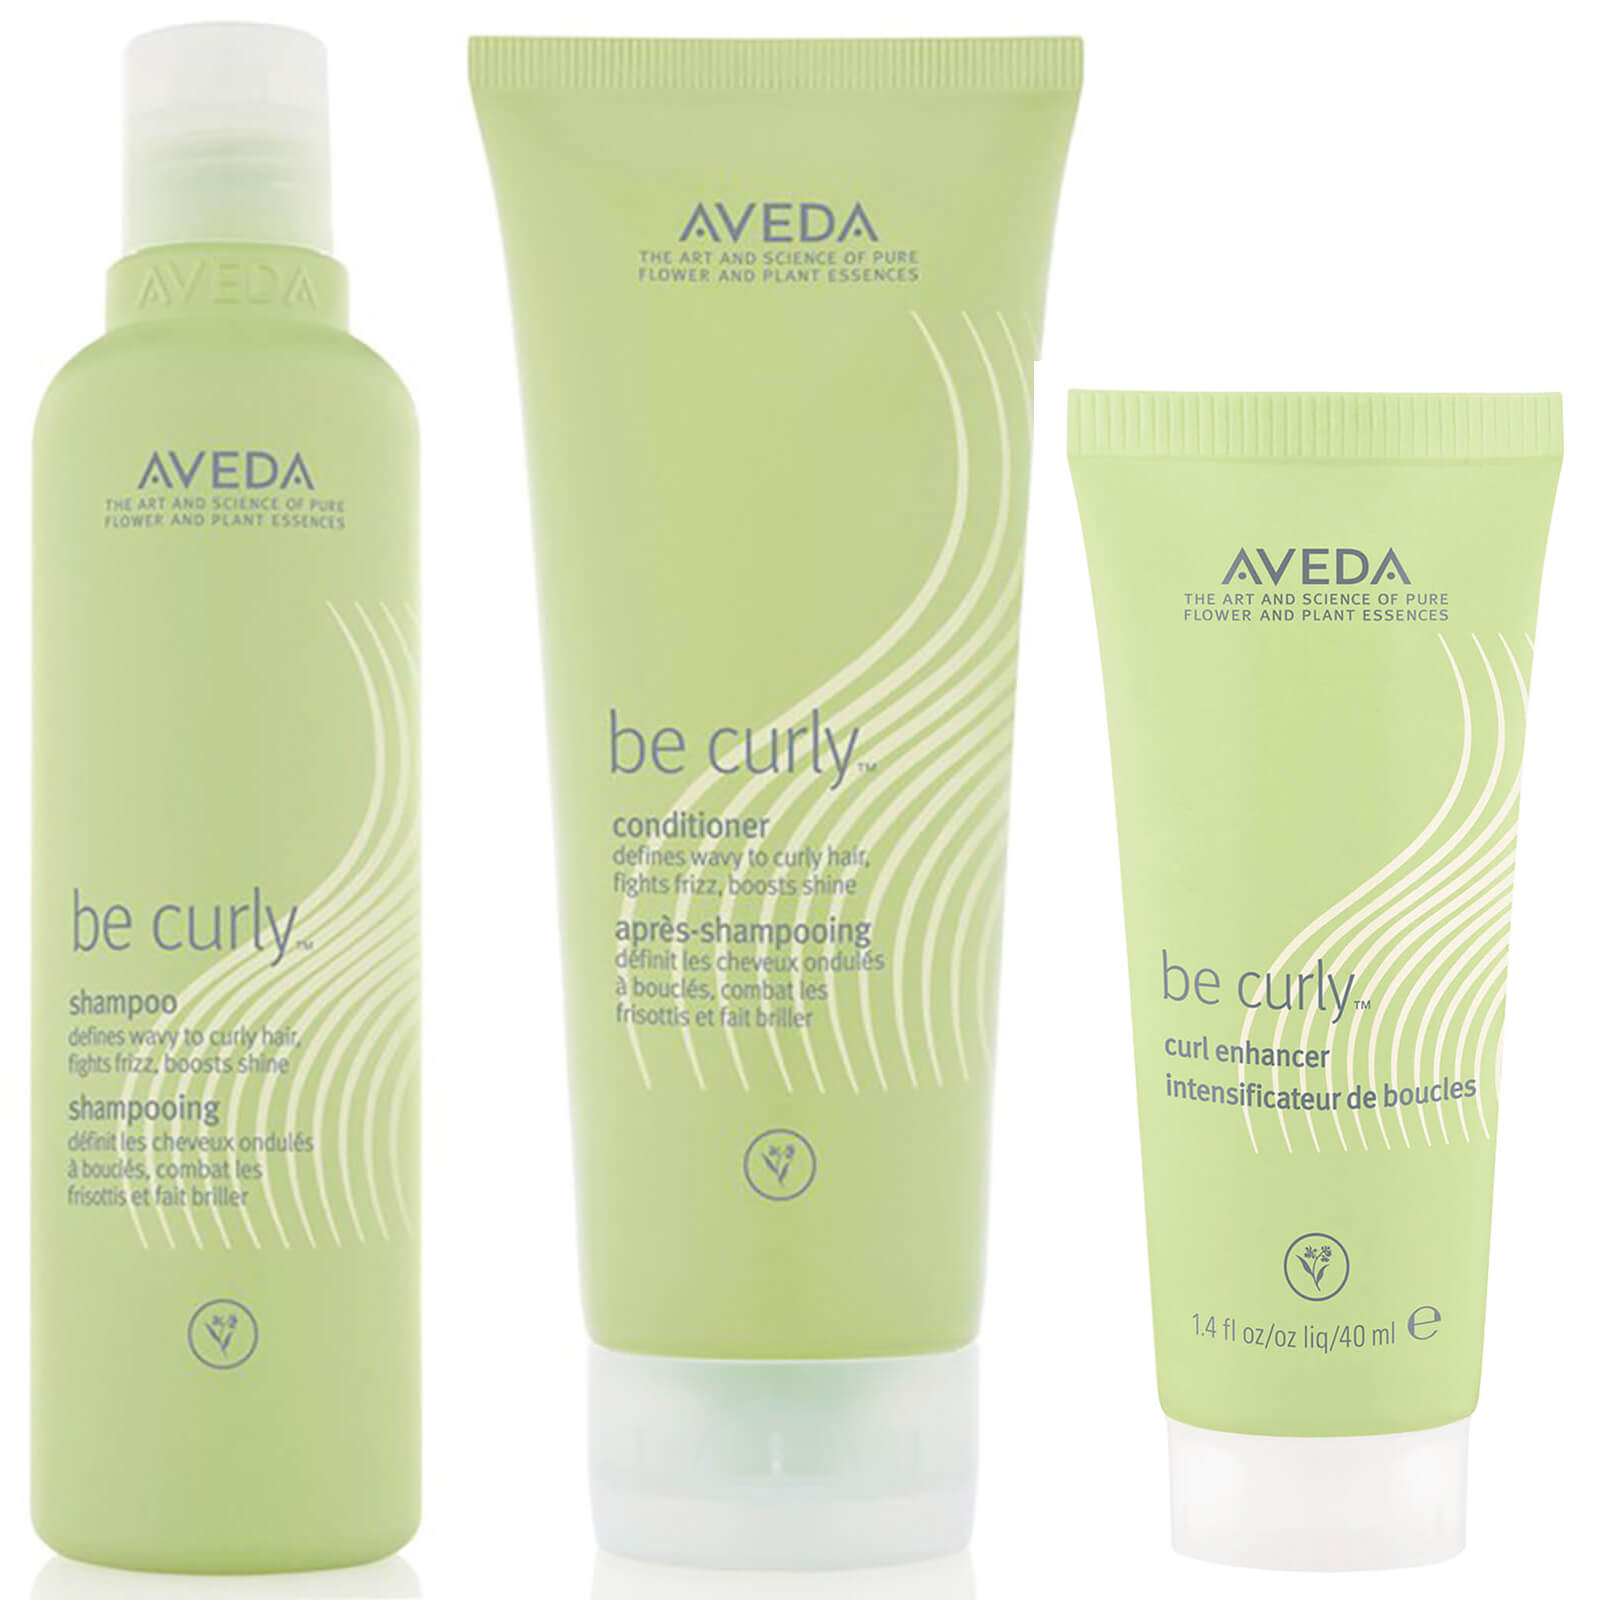 Aveda Be Curly Shampoo and Conditioner Duo with Curl Enhancer Sample